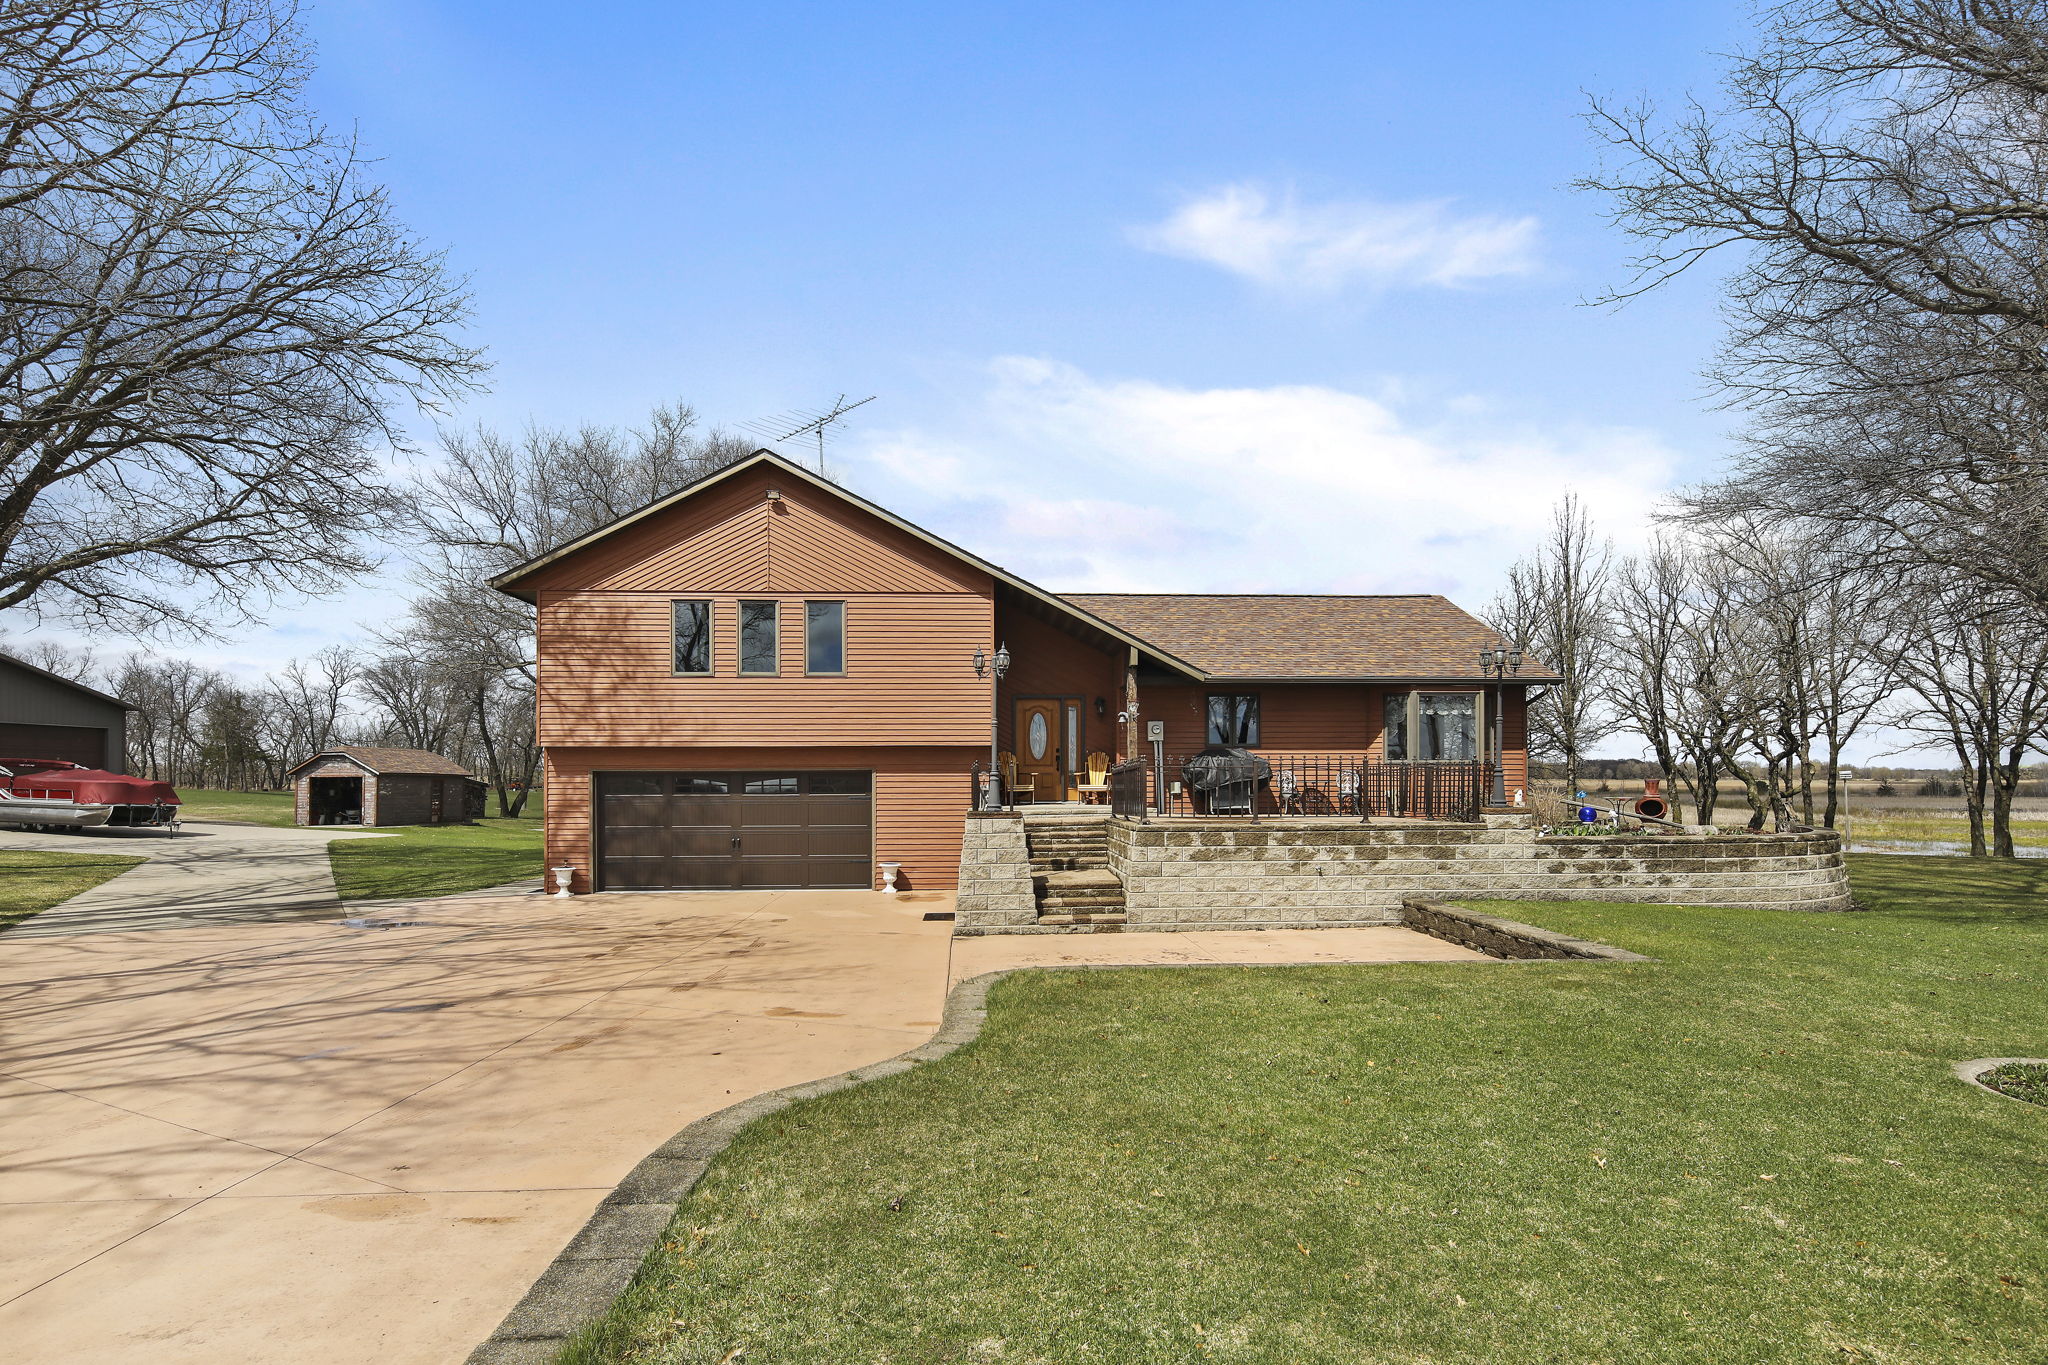  2920 113th Ave, Clear Lake, MN 55319, US